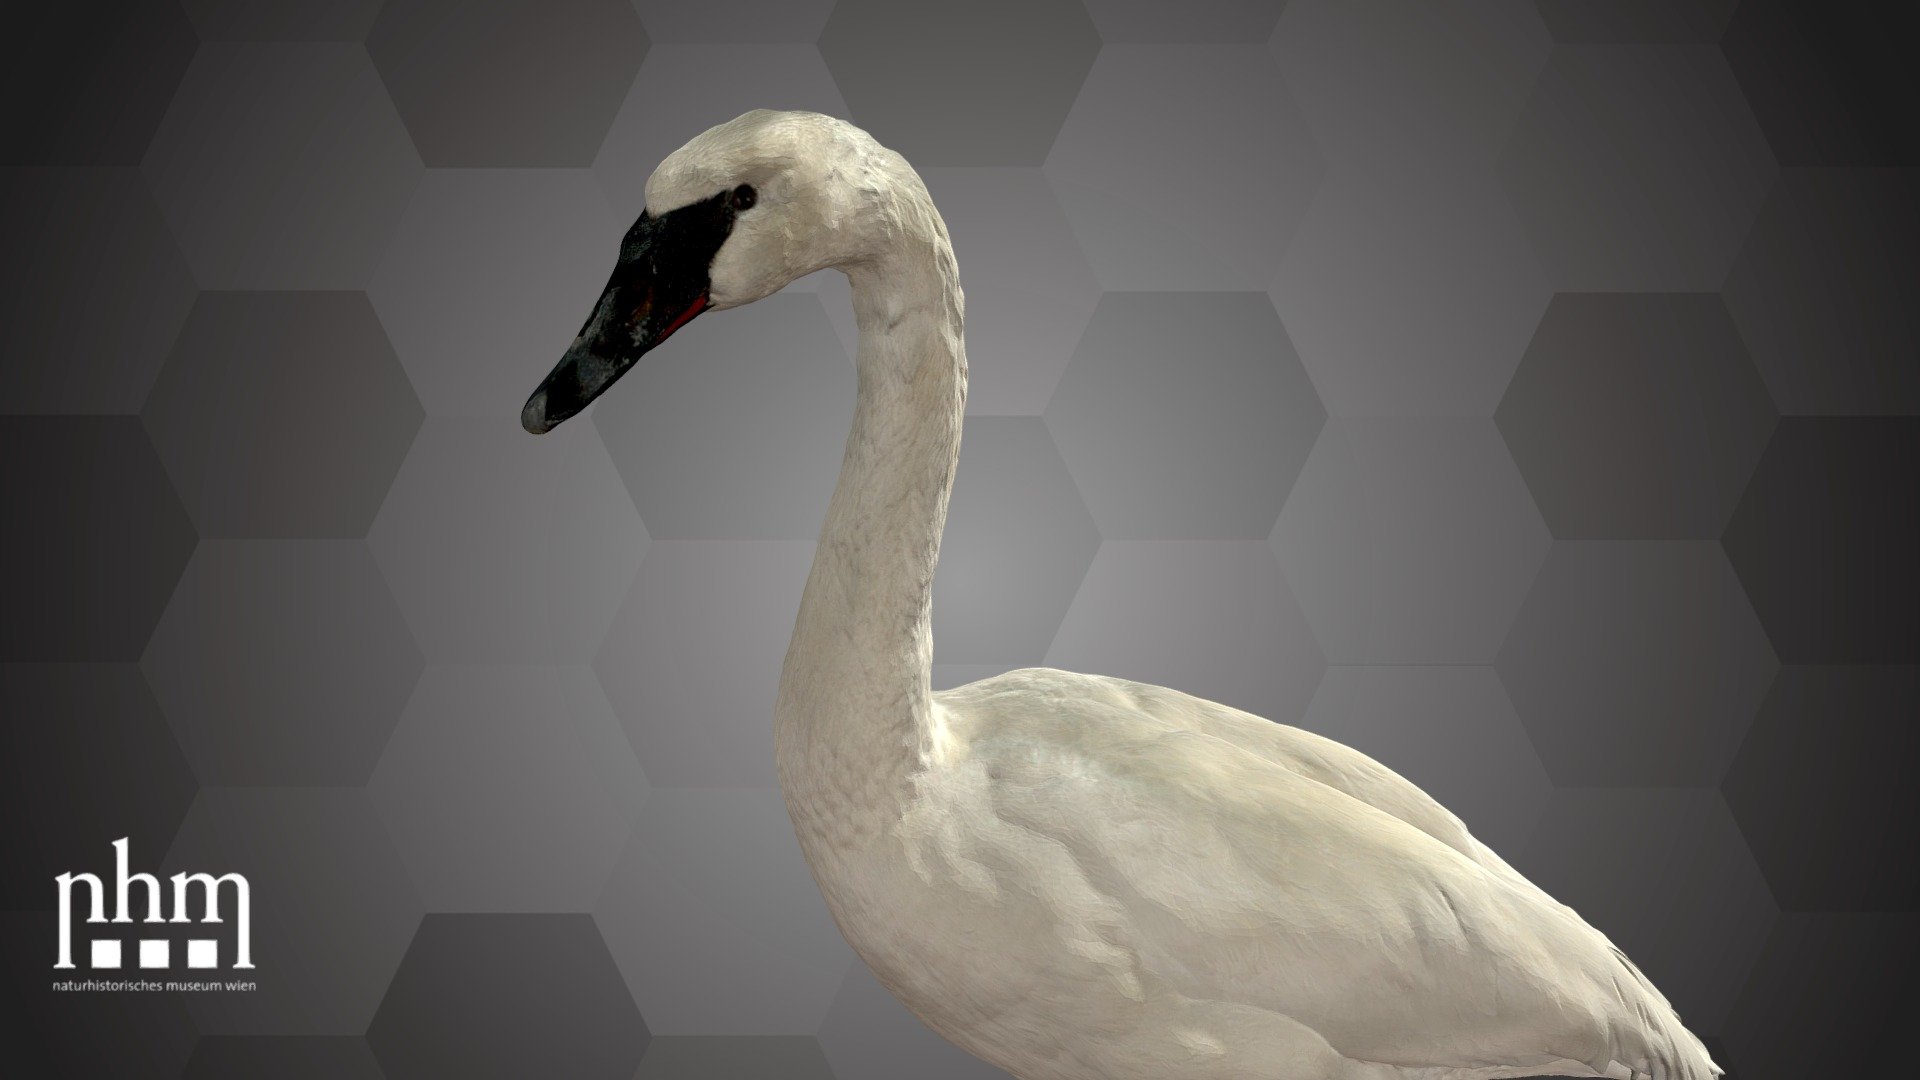 3D scan of a trumpeter swan (Cygnus buccinator), which is the largest native water bird in Northern America and has been widespread there. These birds are around 1.5 meters long, with a wingspan of more than 2 meters. Trumpeter swans got their vernacular name due to their trumpet-like calls. This also reflects the scientific species name derived from &ldquo;buccinare